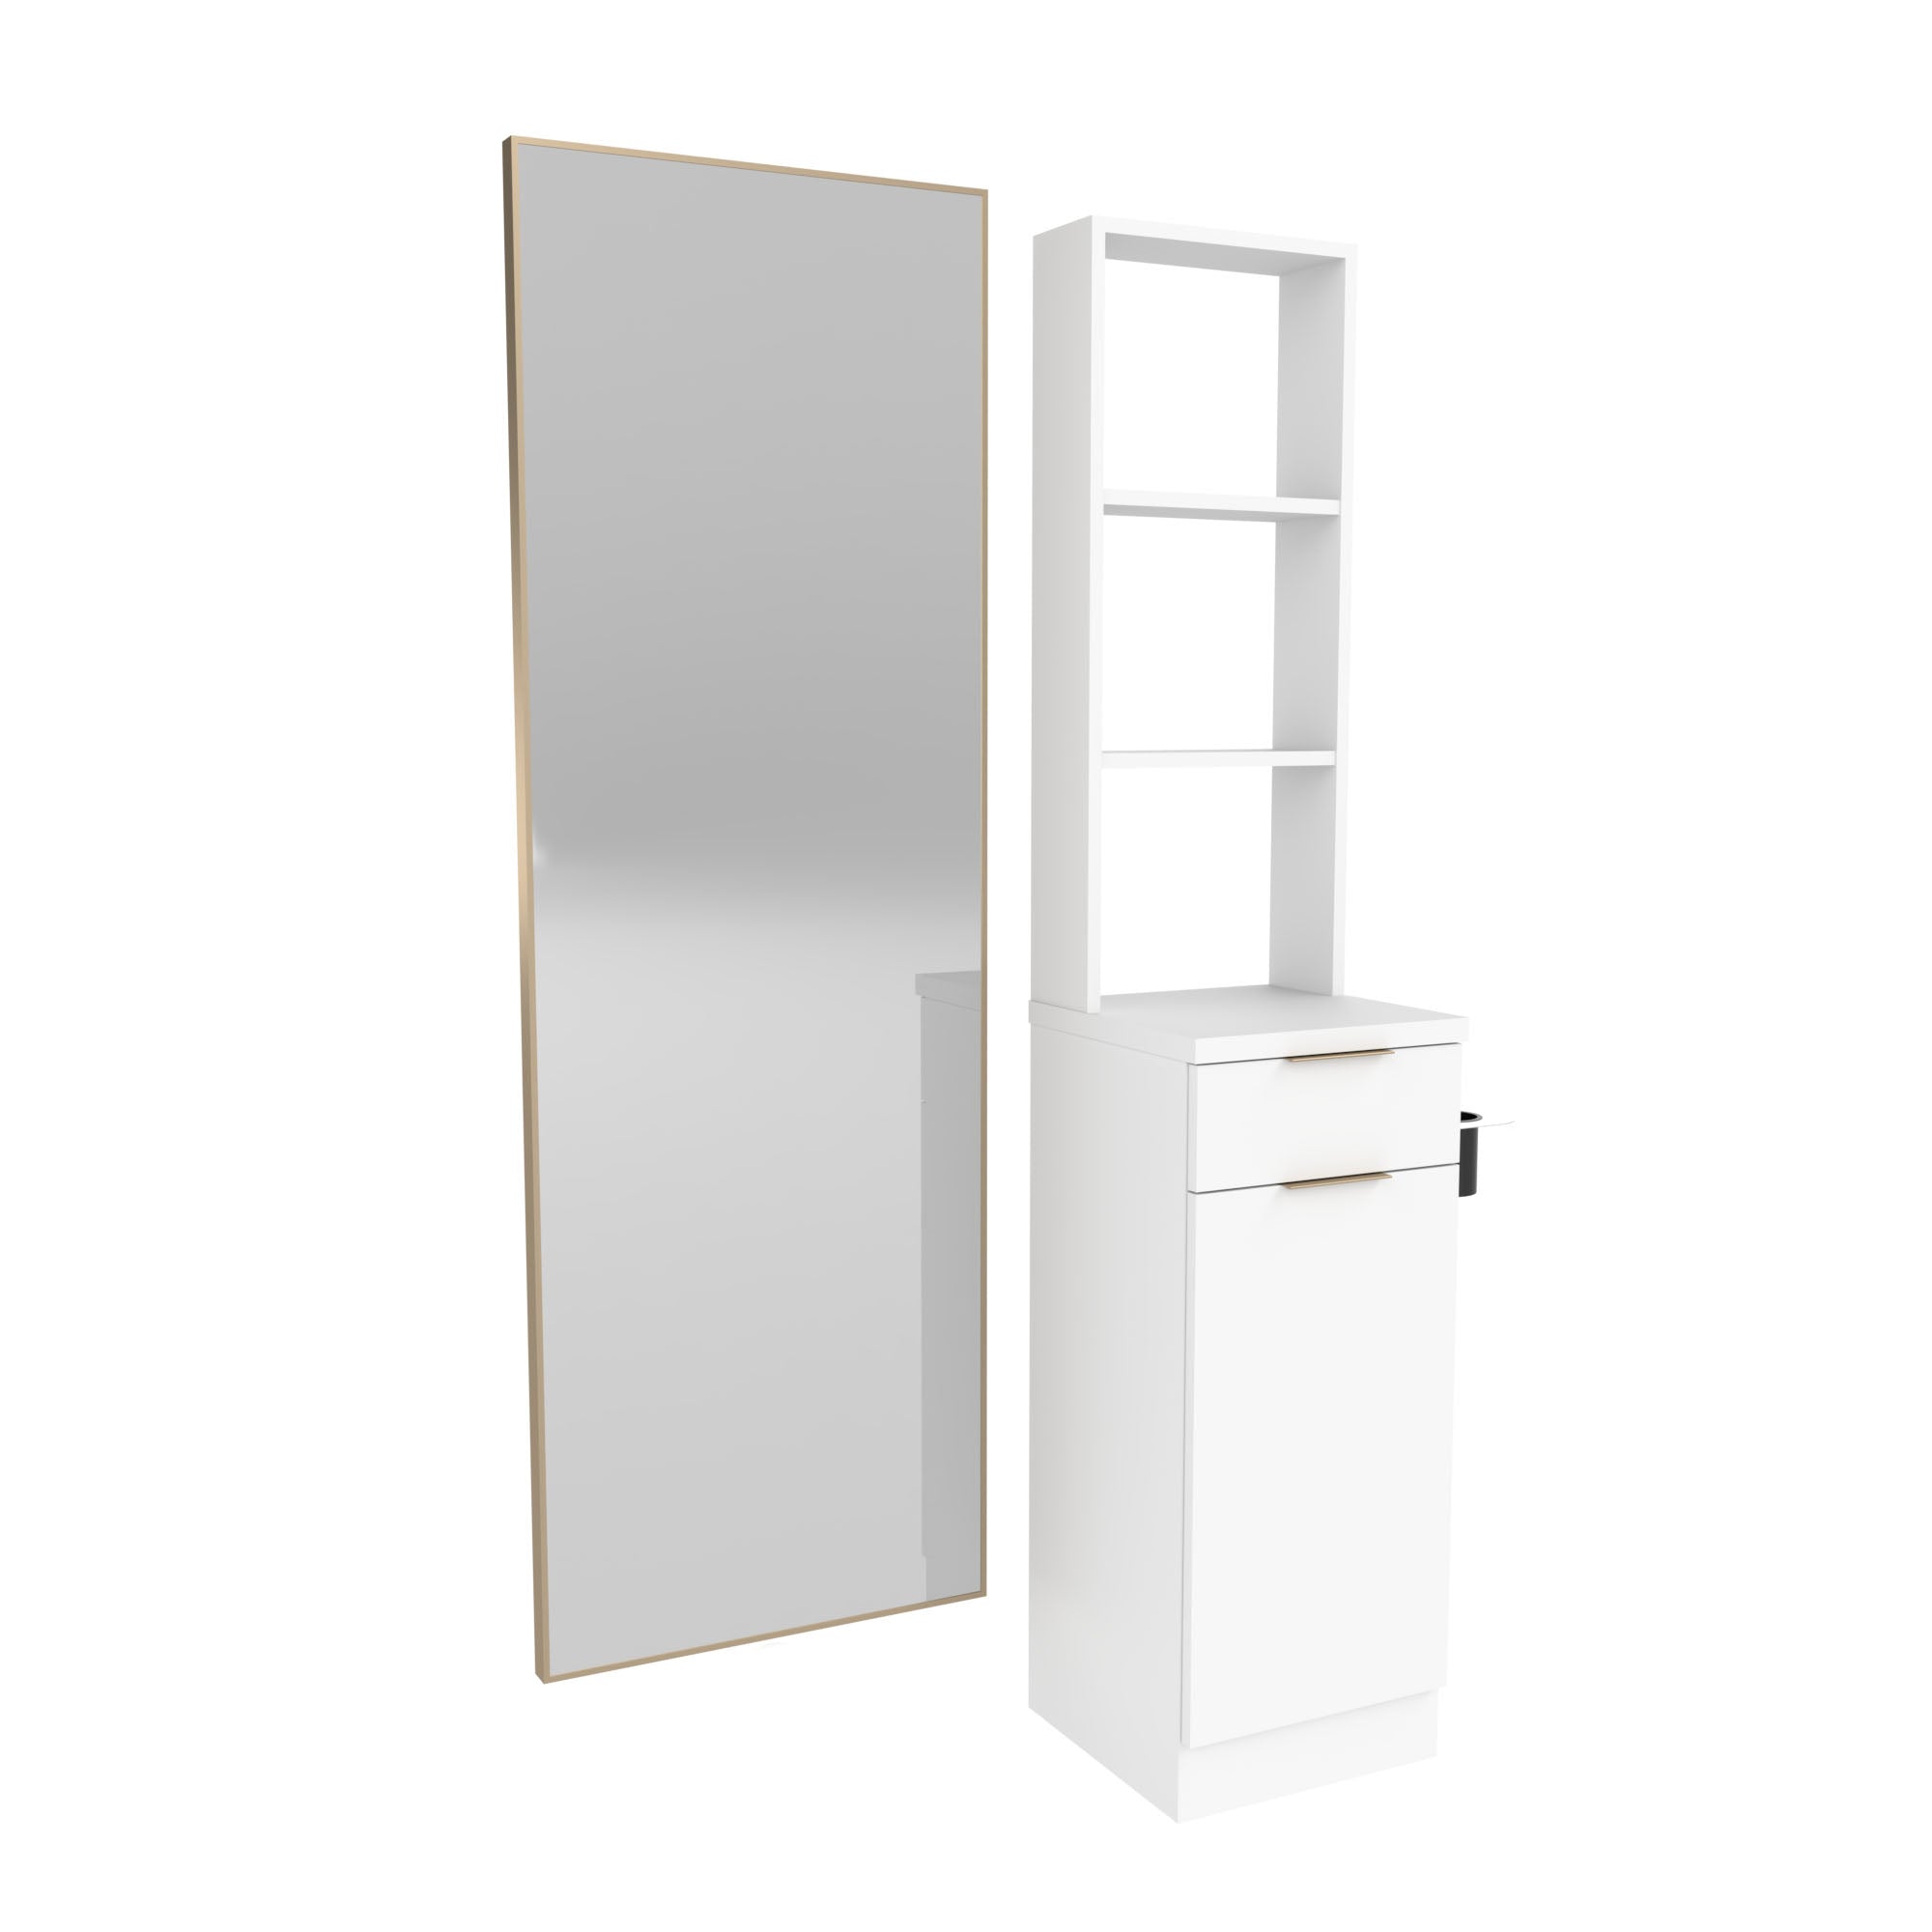 Comprar BASE TORRE 180 ATORNILLABLE A PARED Online - Sonicolor